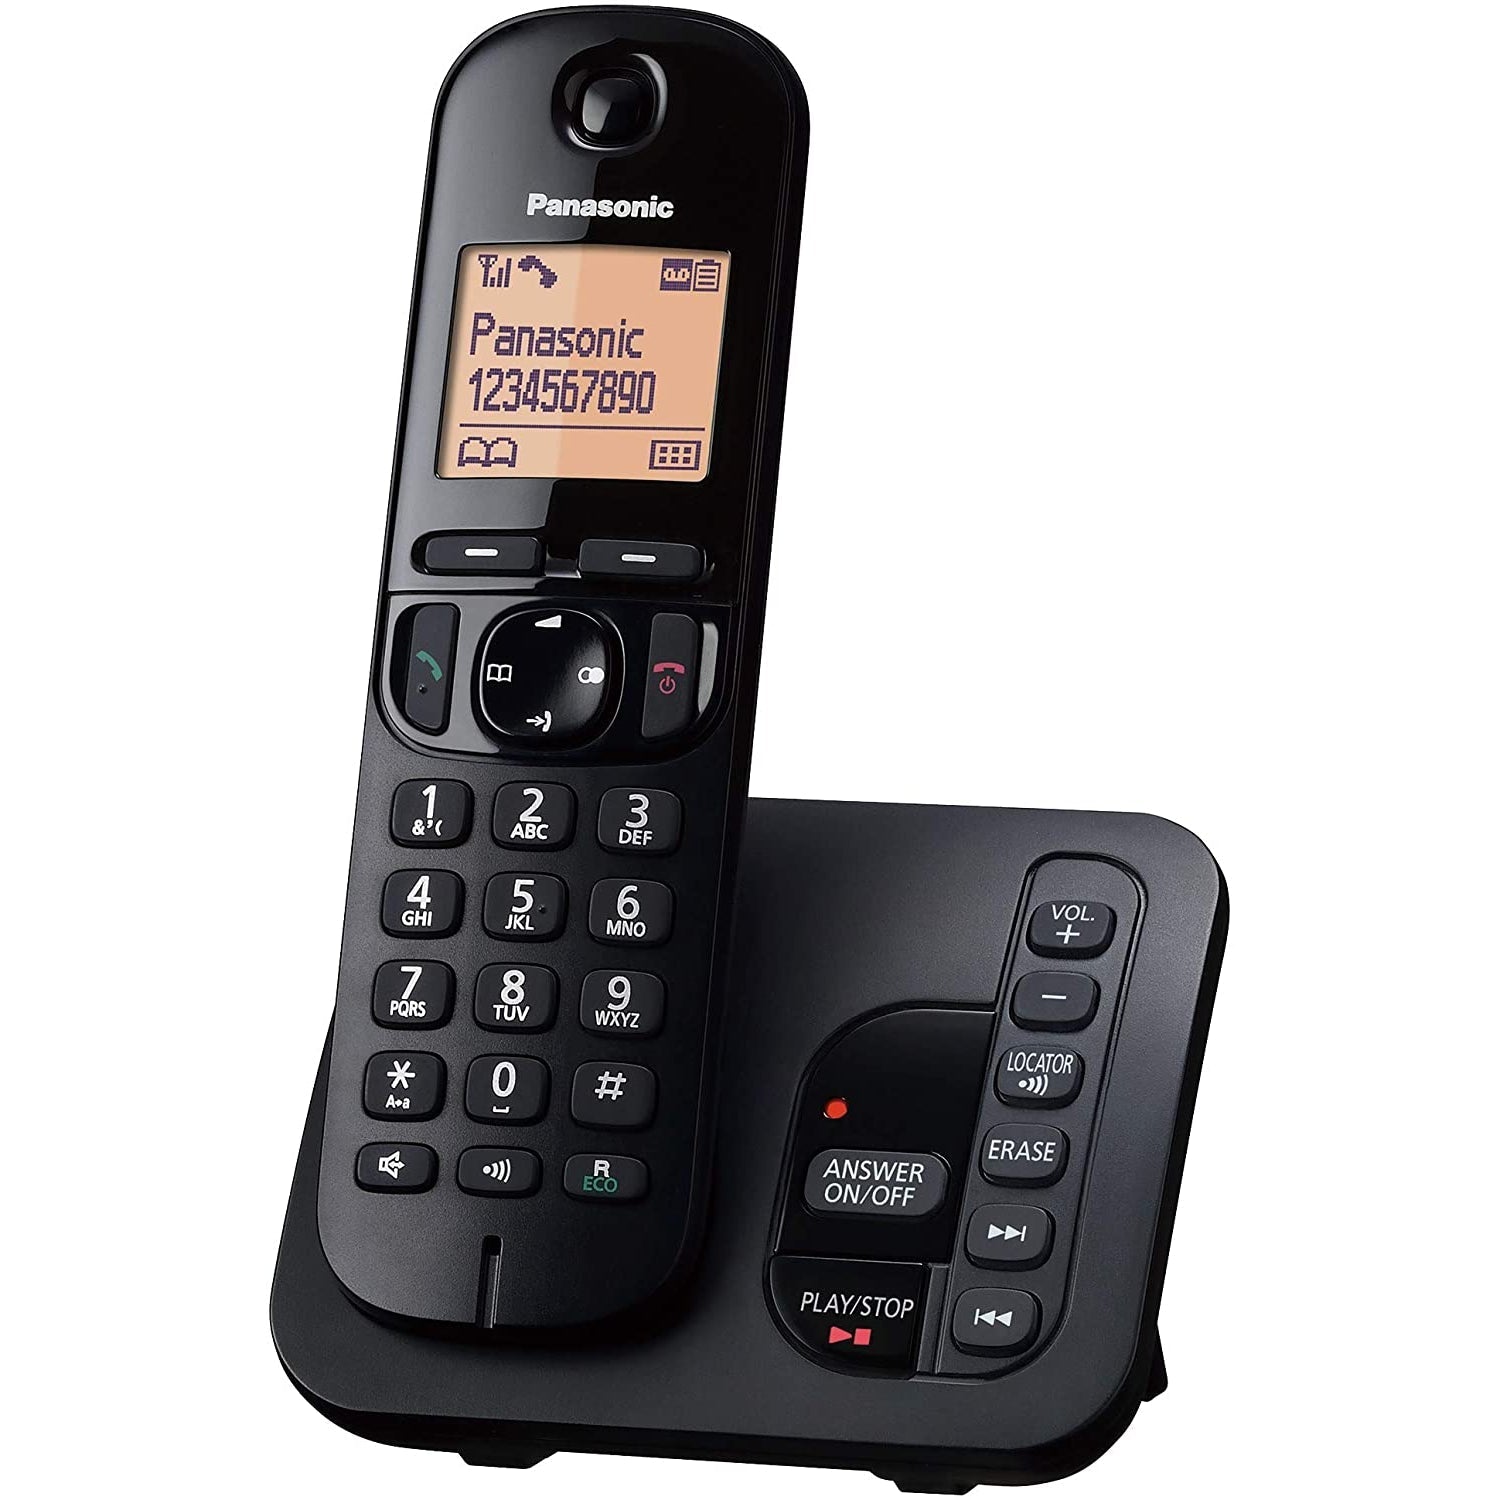 Panasonic KX-TGC220EB DECT Cordless Phone with Answering Machine - Refurbished Excellent